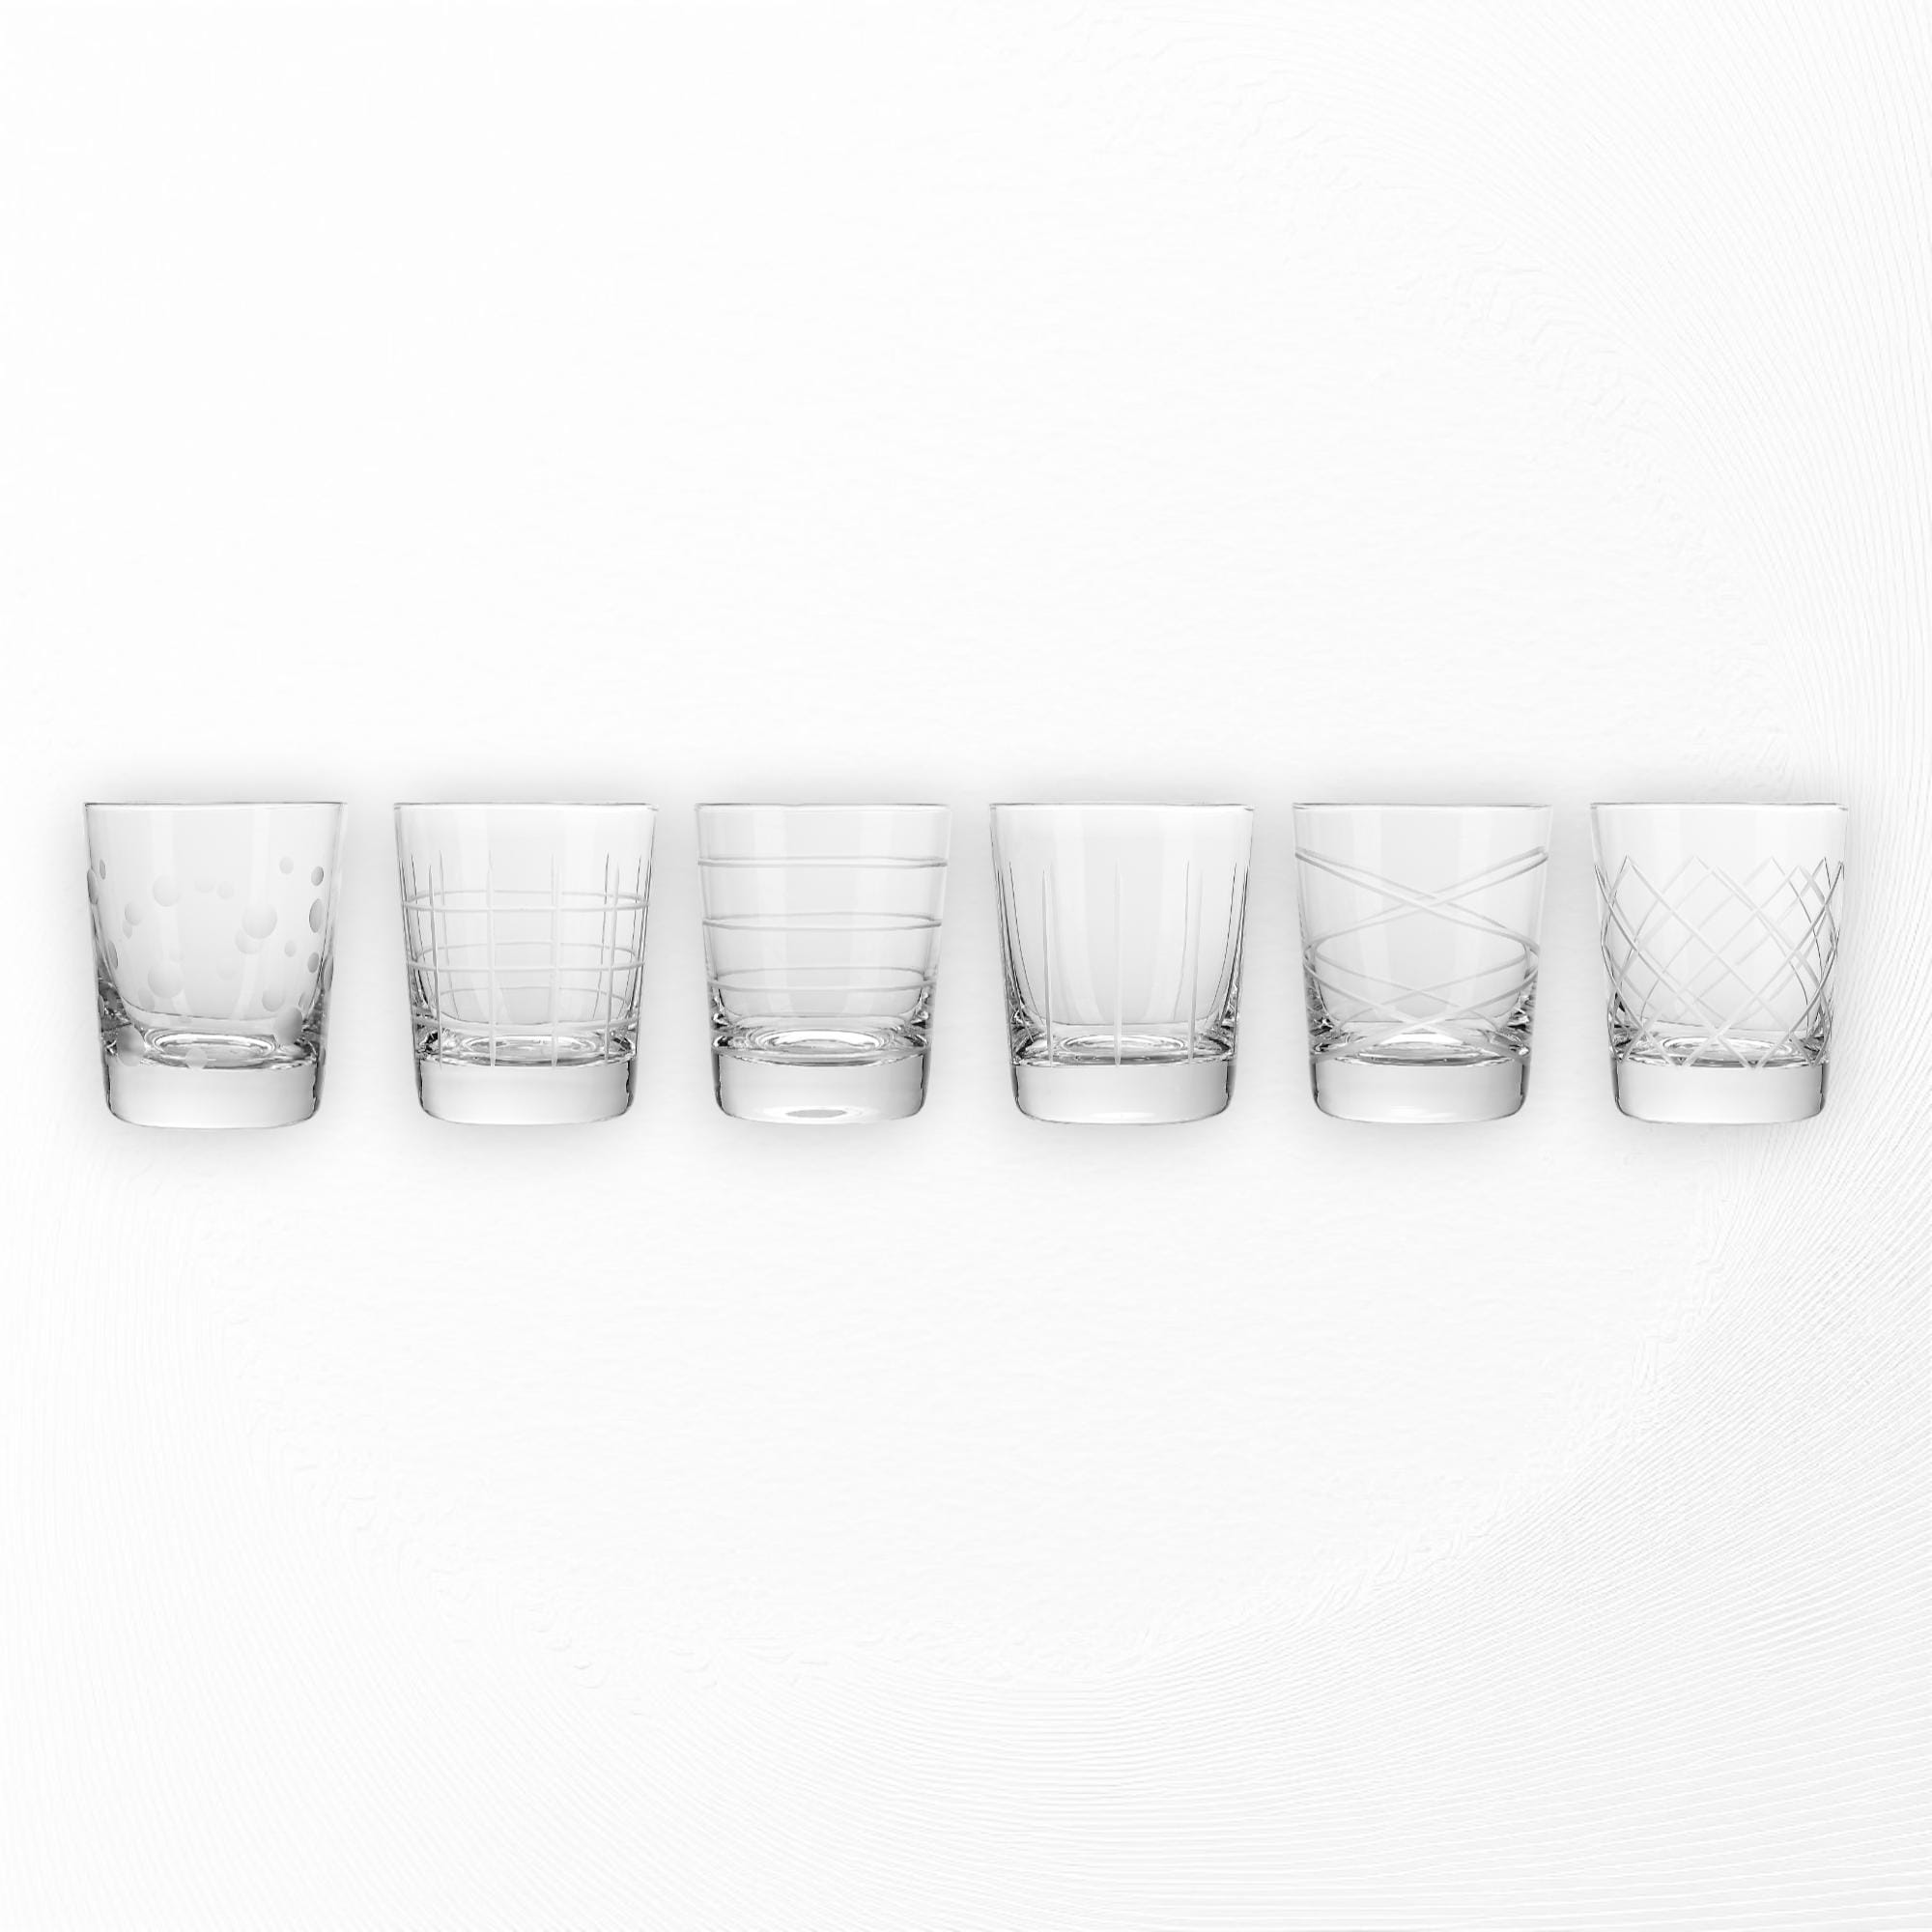 https://ak1.ostkcdn.com/images/products/is/images/direct/556ff106a72351294e9211ae7be00500b5bfd856/Fifth-Avenue-Crystal-Medallion-Old-Fashioned-Glasses-Set-of-6.jpg